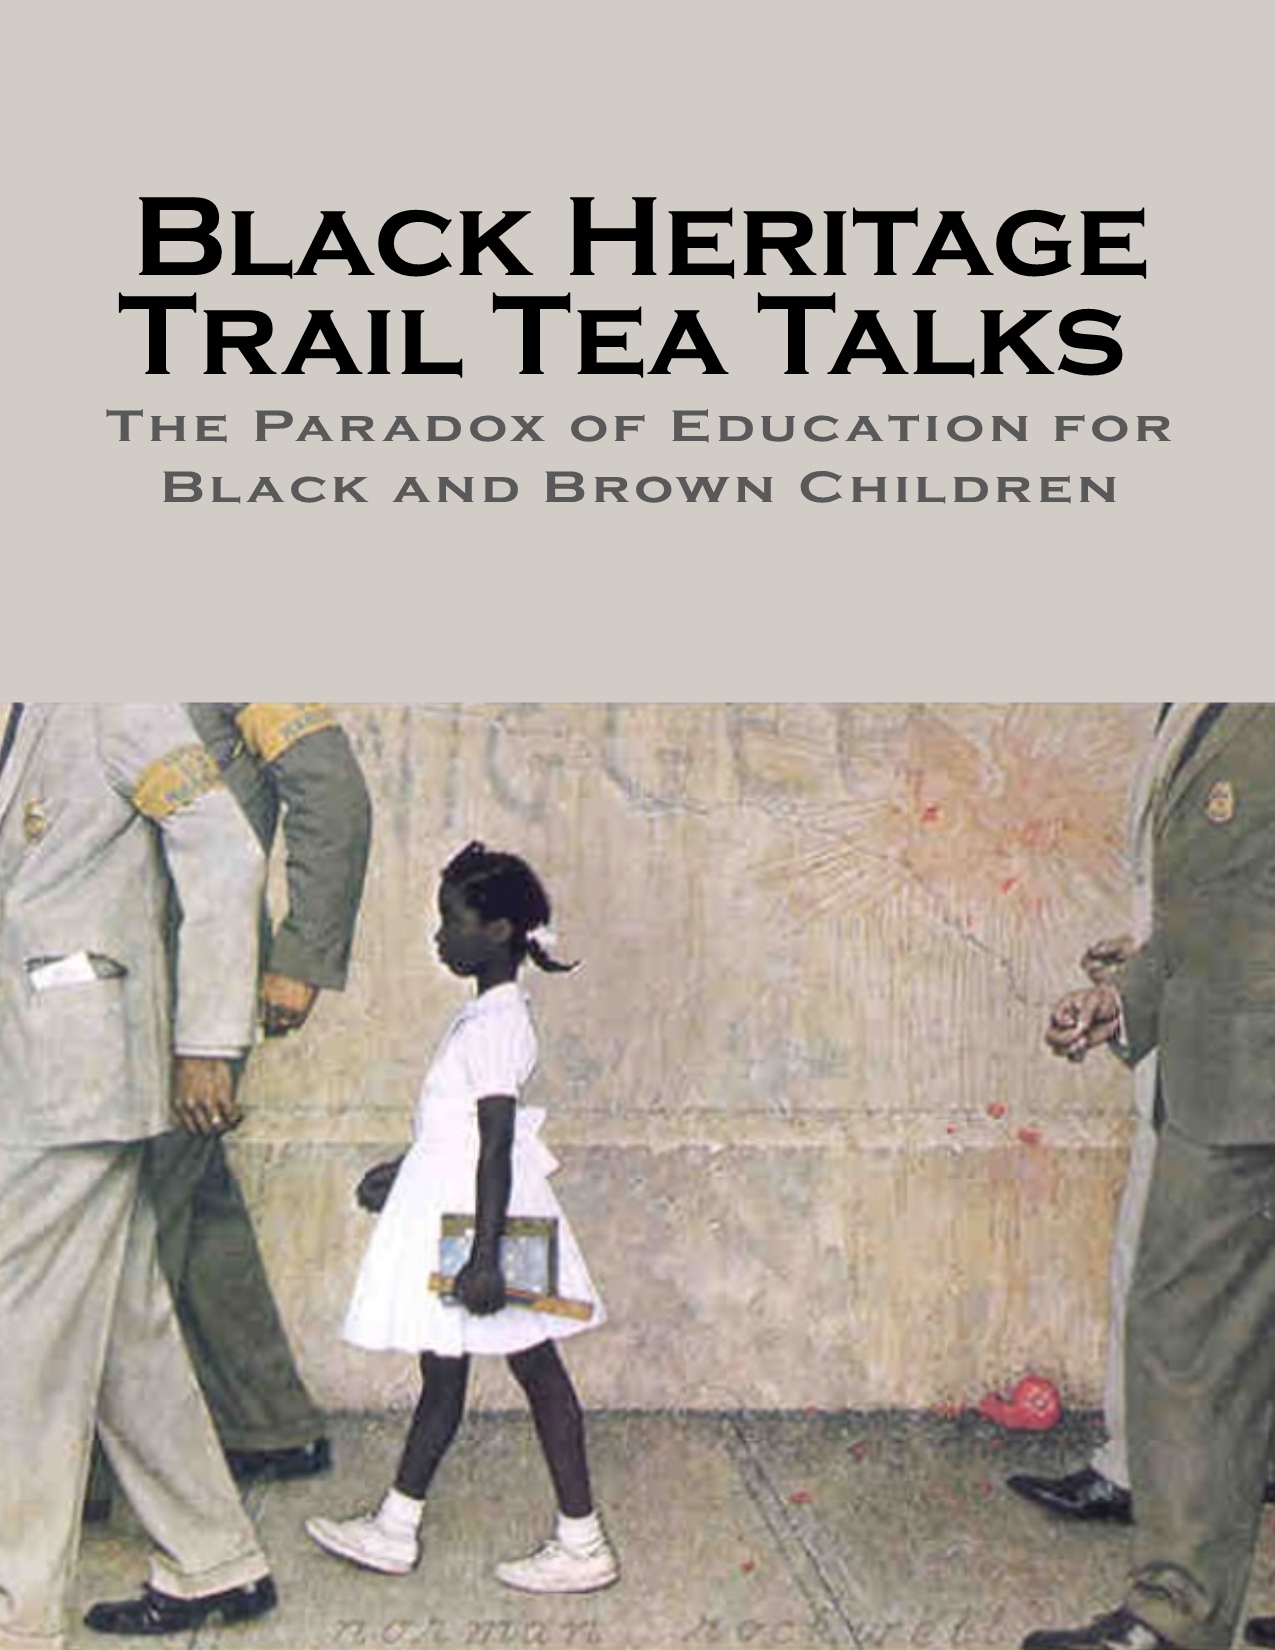 Black Heritage Trail Tea Talks The Paradox of Education for Black and Brown Children black girl in white dress surrounded by men walking to school in city